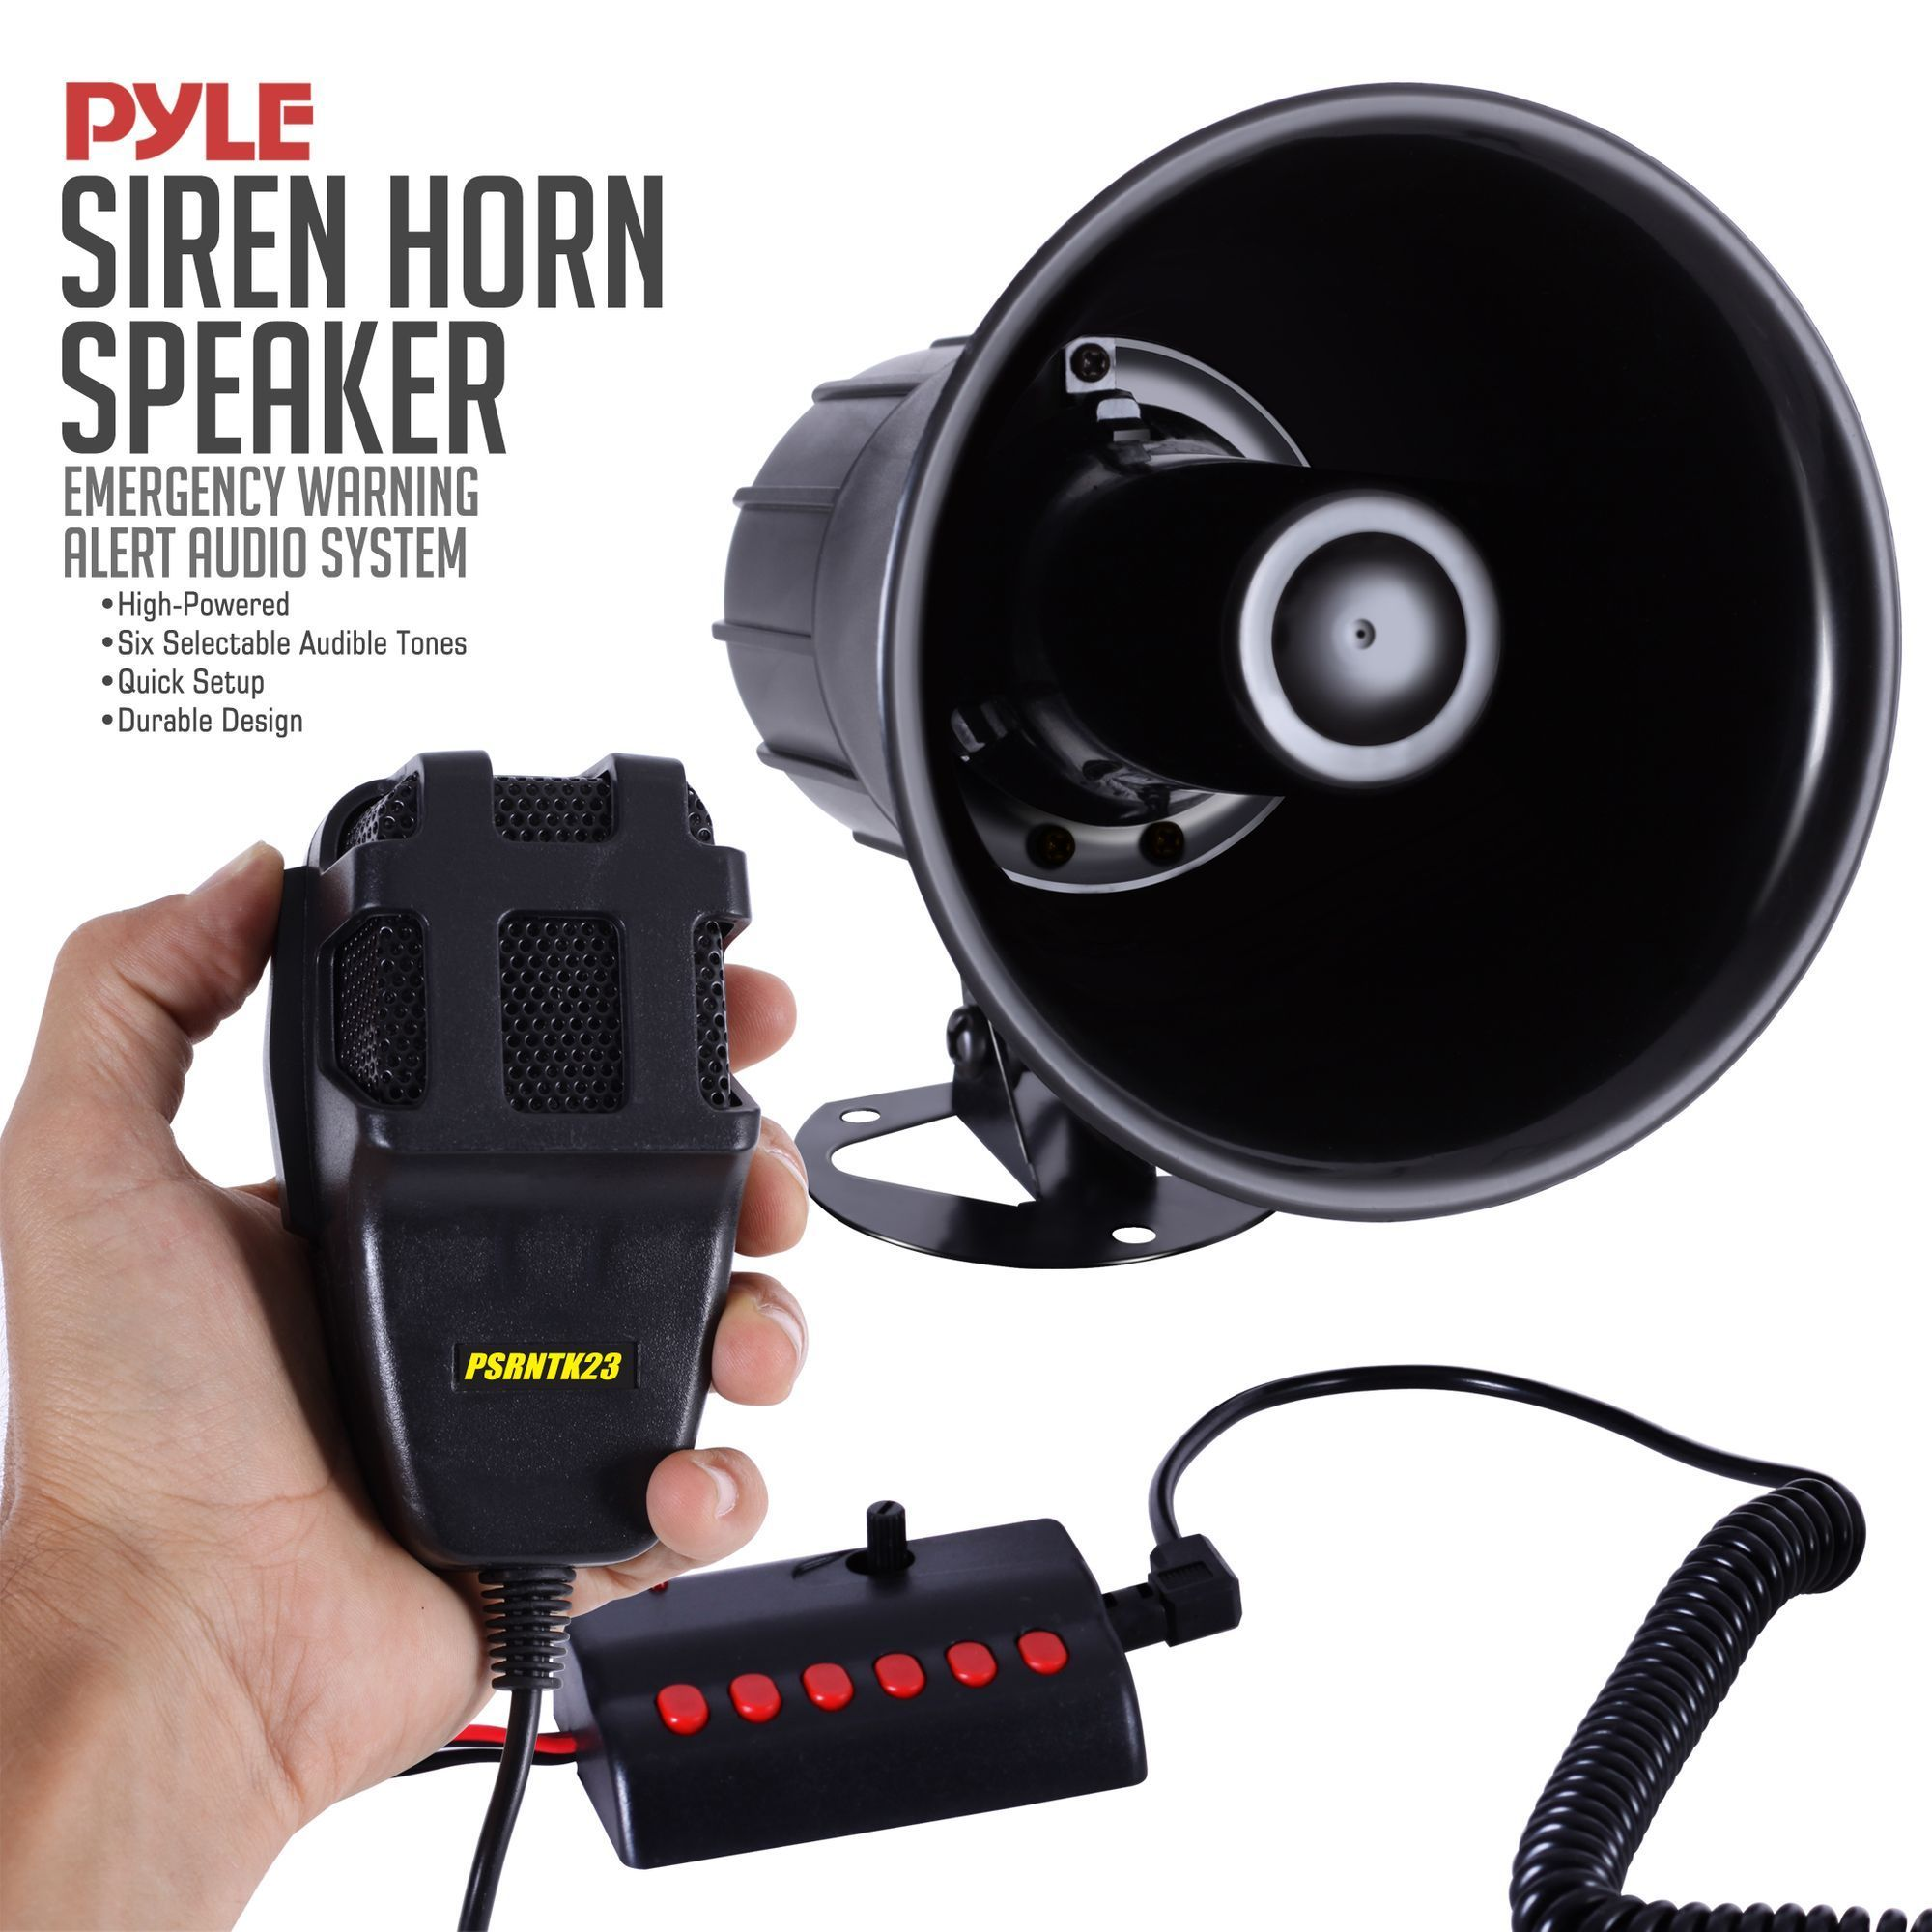 Pyle Vehicle Siren Horn Speaker System, Sound Amplifier, Wired PA Microphone Controller, (PSRNTK23)